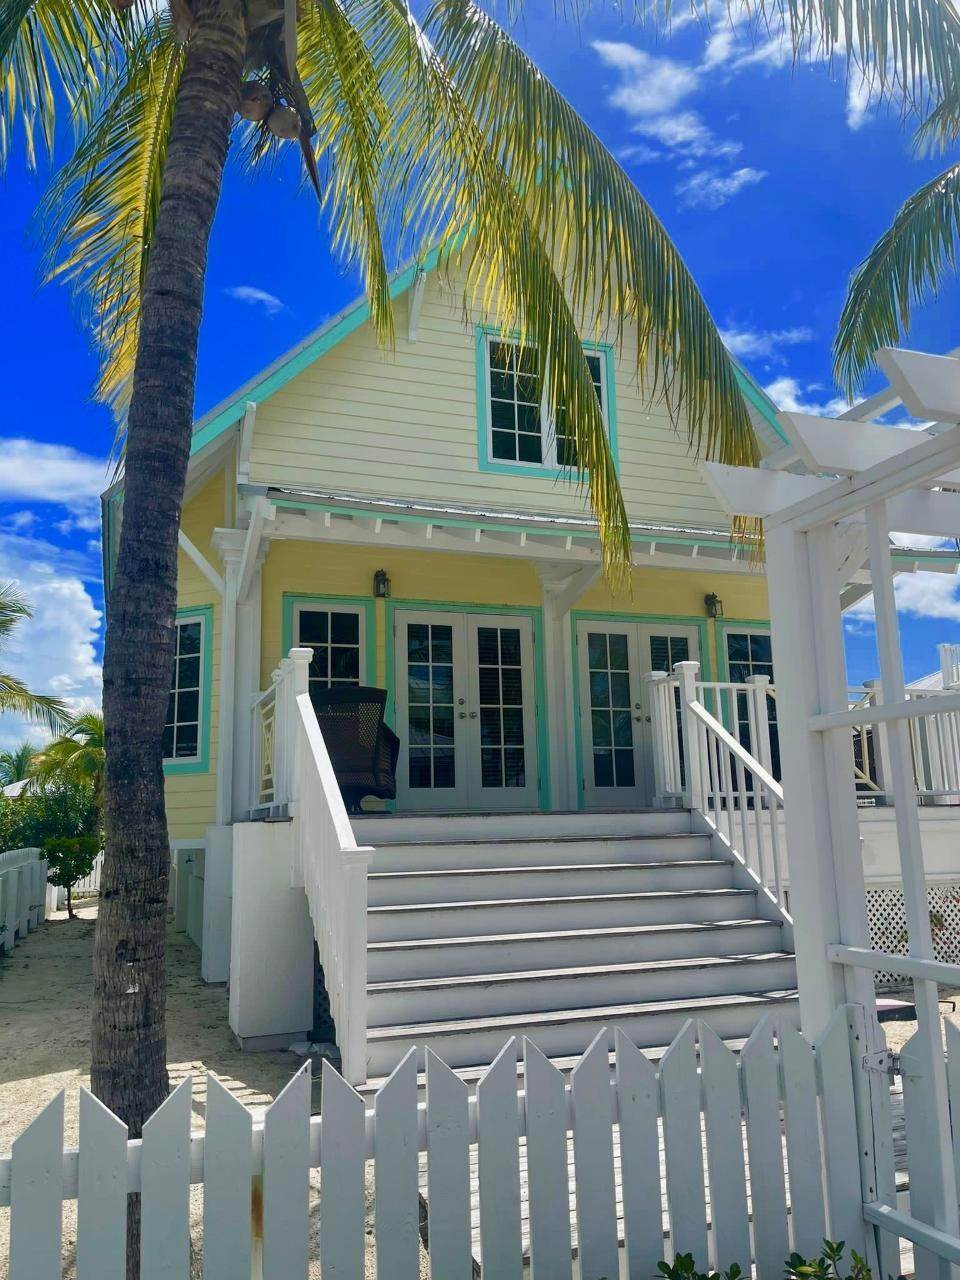 Resort / Hotel for Sale at Chub Cay, Berry Islands, Bahamas